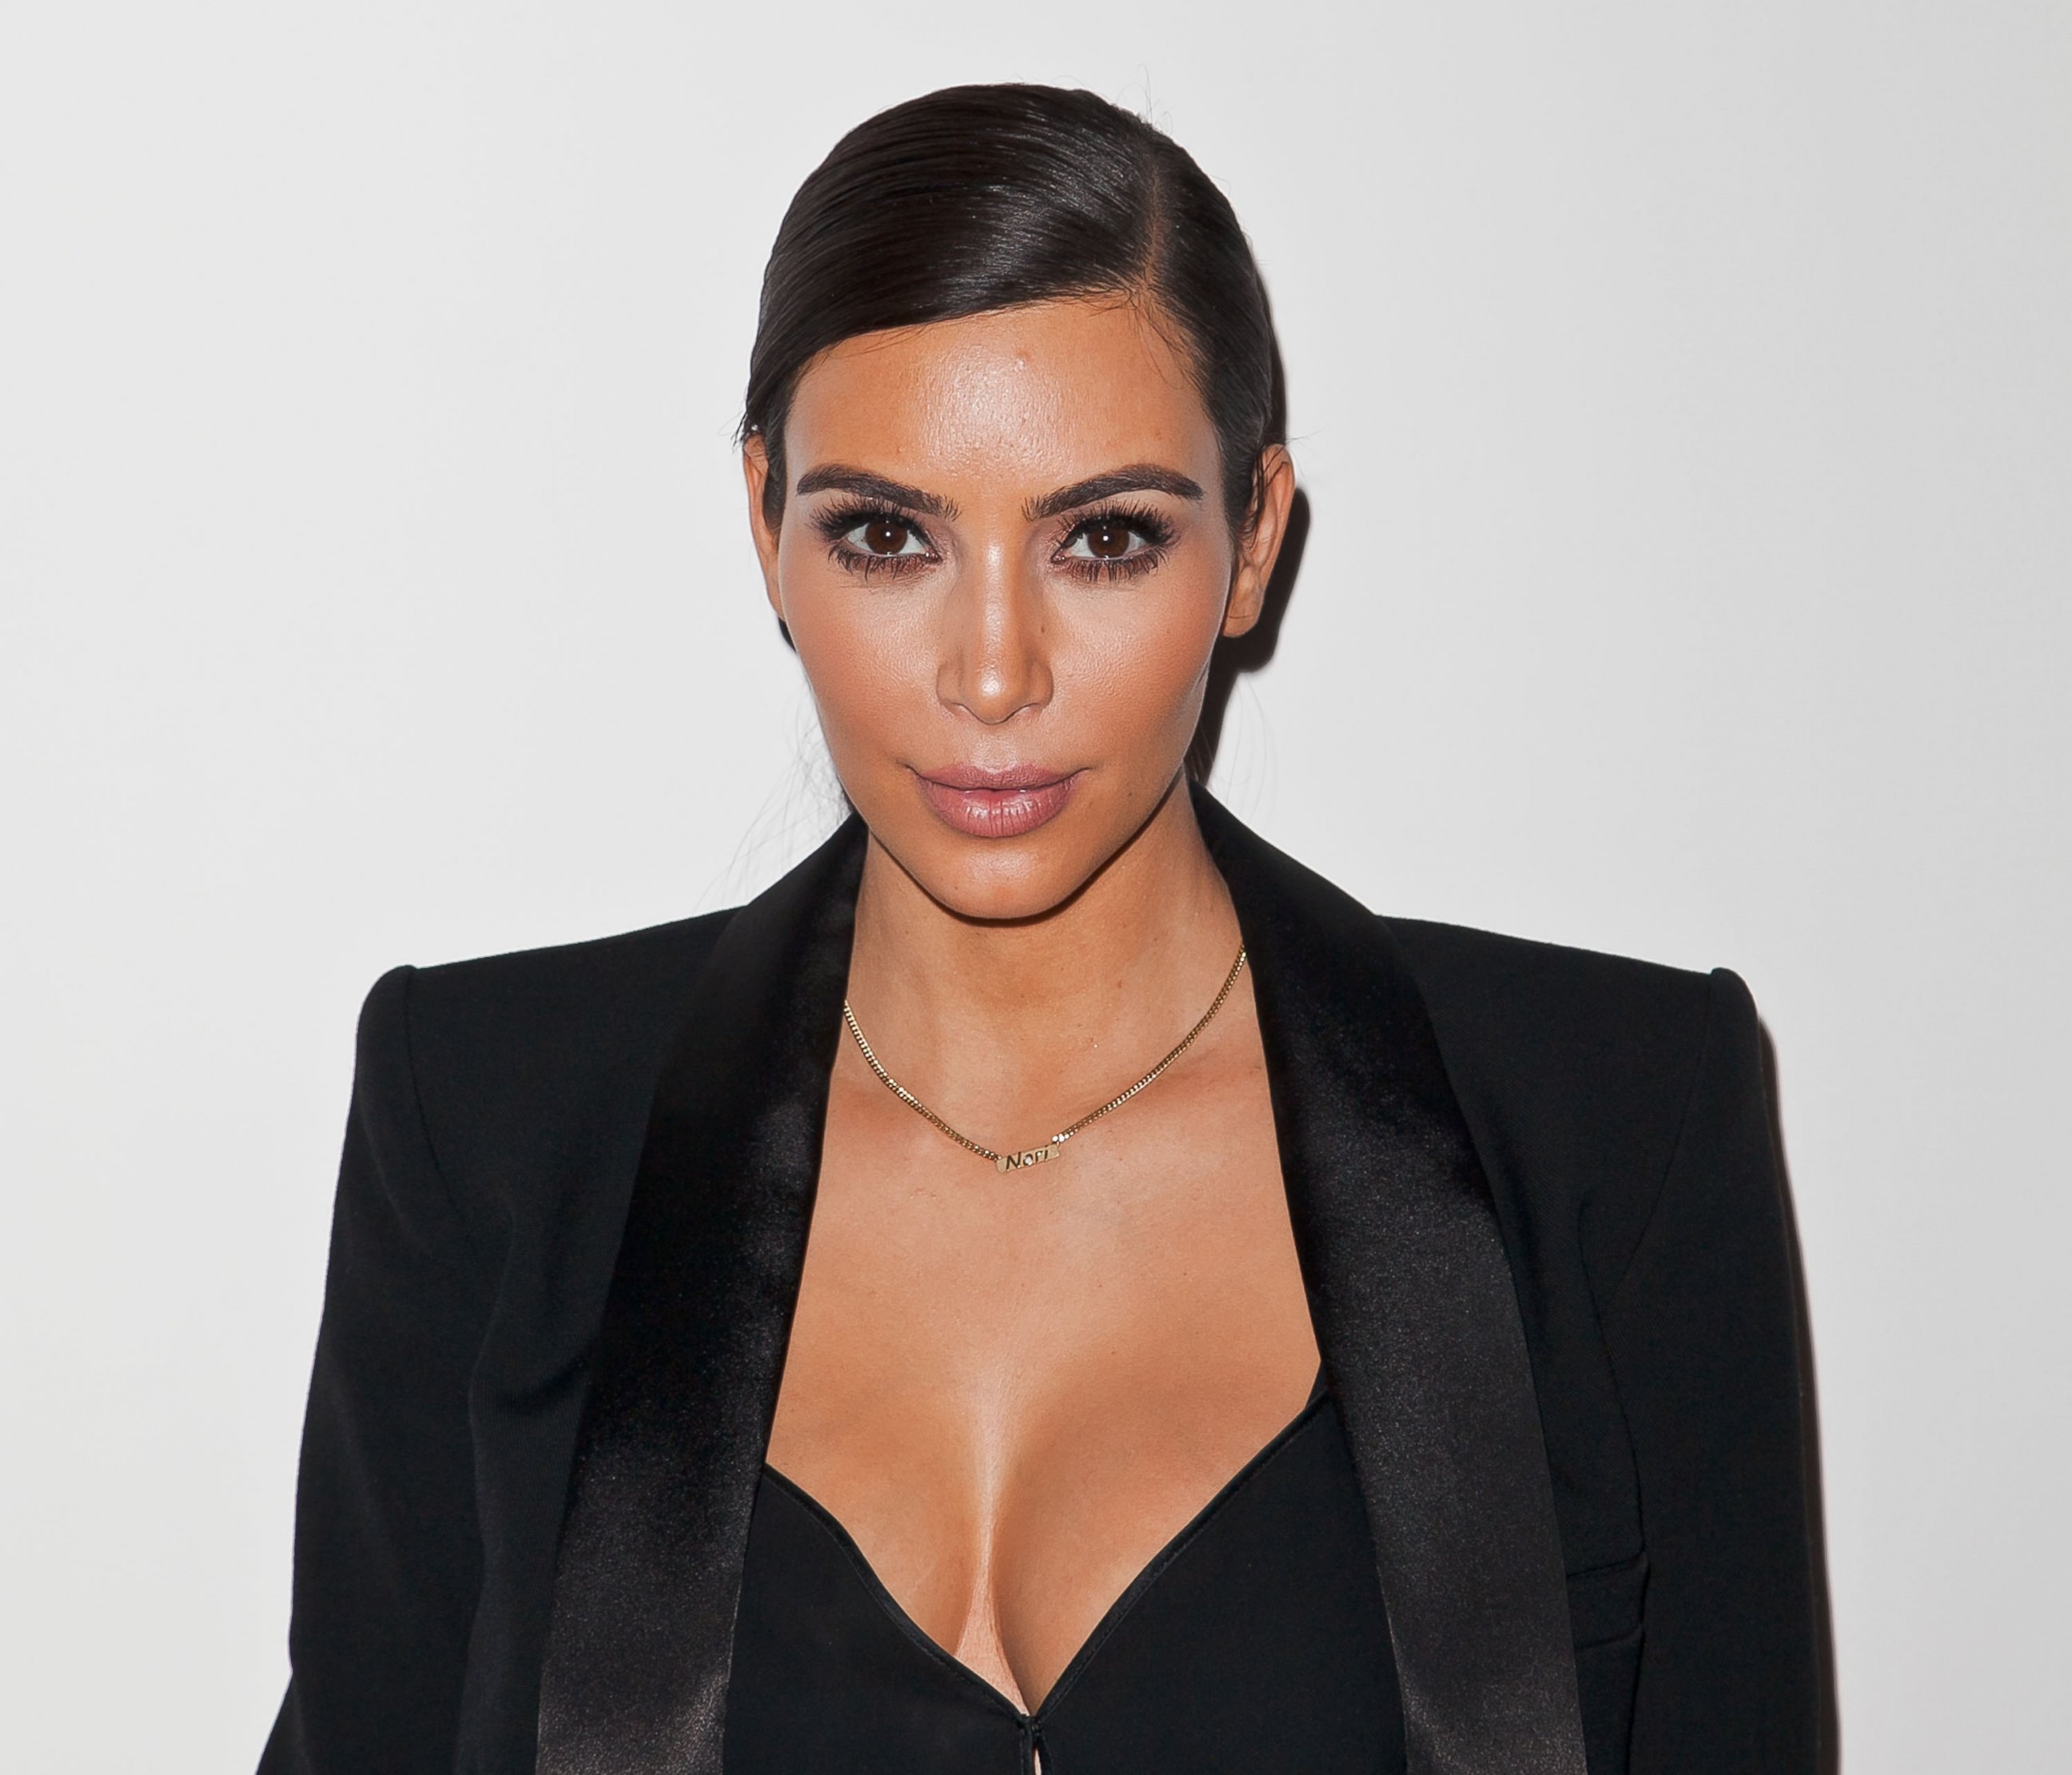 PHOTO: Kim Kardashian attends an event at Kayne Griffin Corcoran Gallery on April 8, 2014 in Los Angeles.